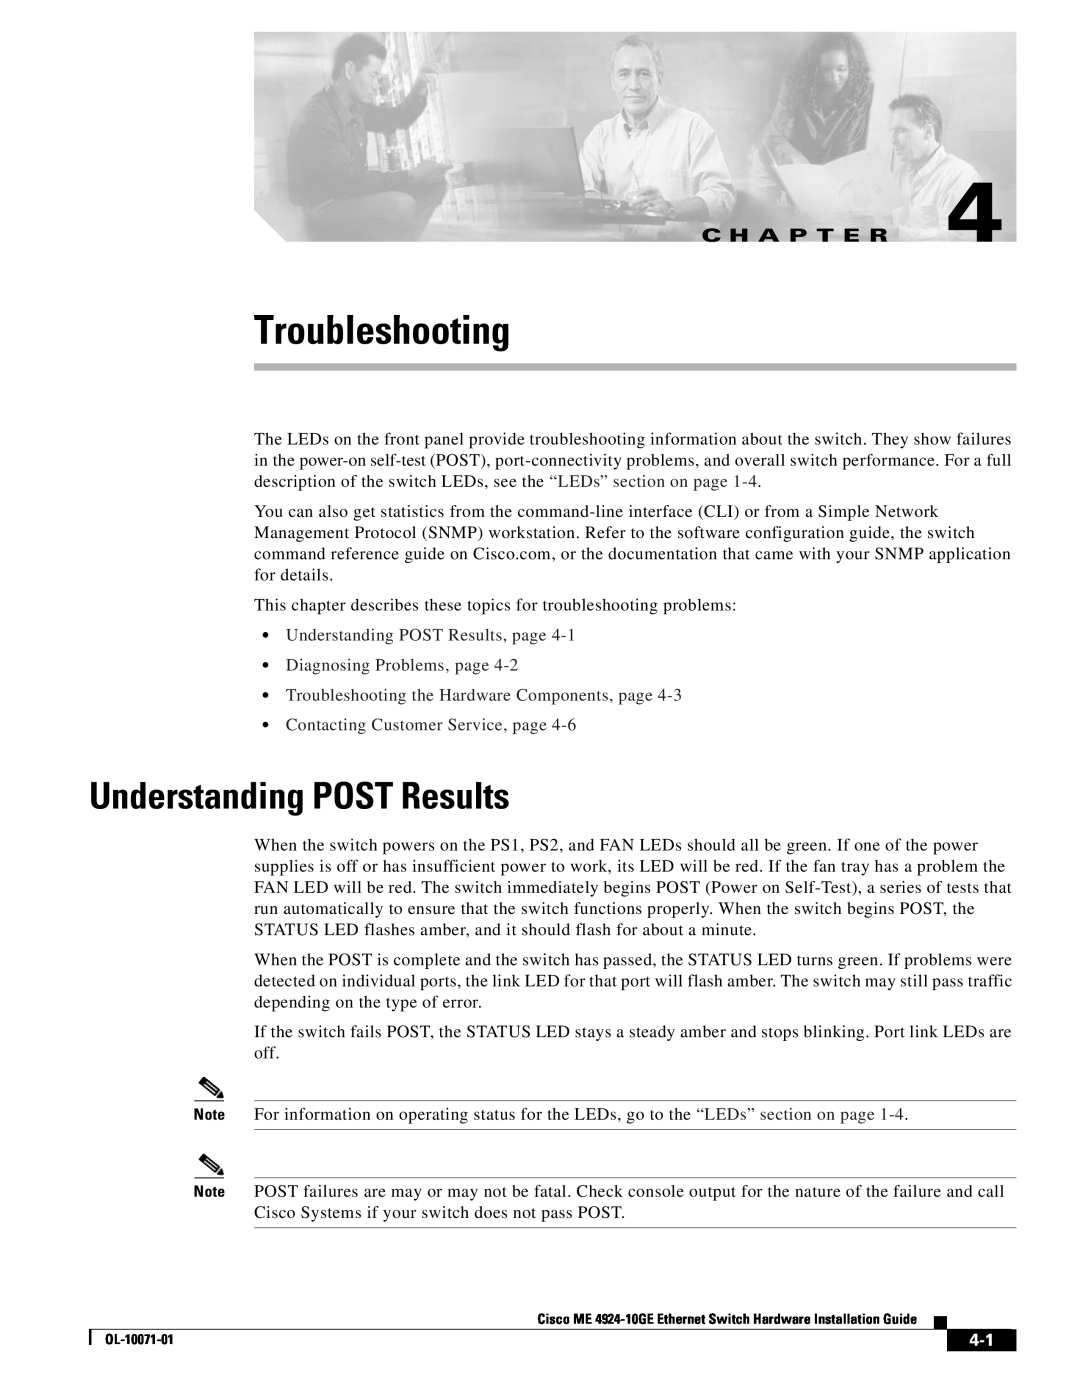 Cisco Systems ME 4924-10GE Understanding POST Results, Troubleshooting the Hardware Components, page, C H A P T E R 